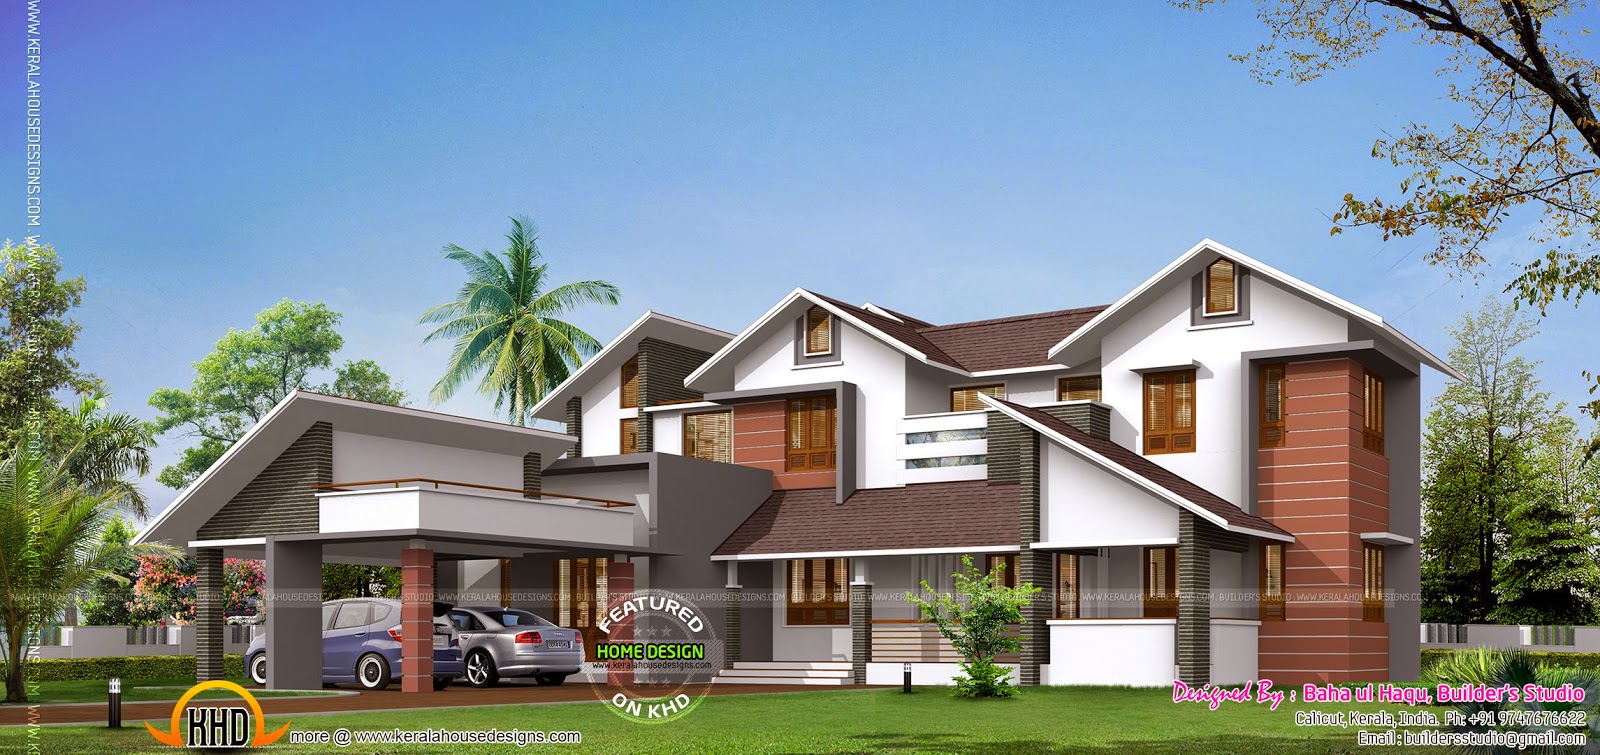 Traditional mix modern house - Kerala Home Design and Floor Plans - 9K+  Dream Houses